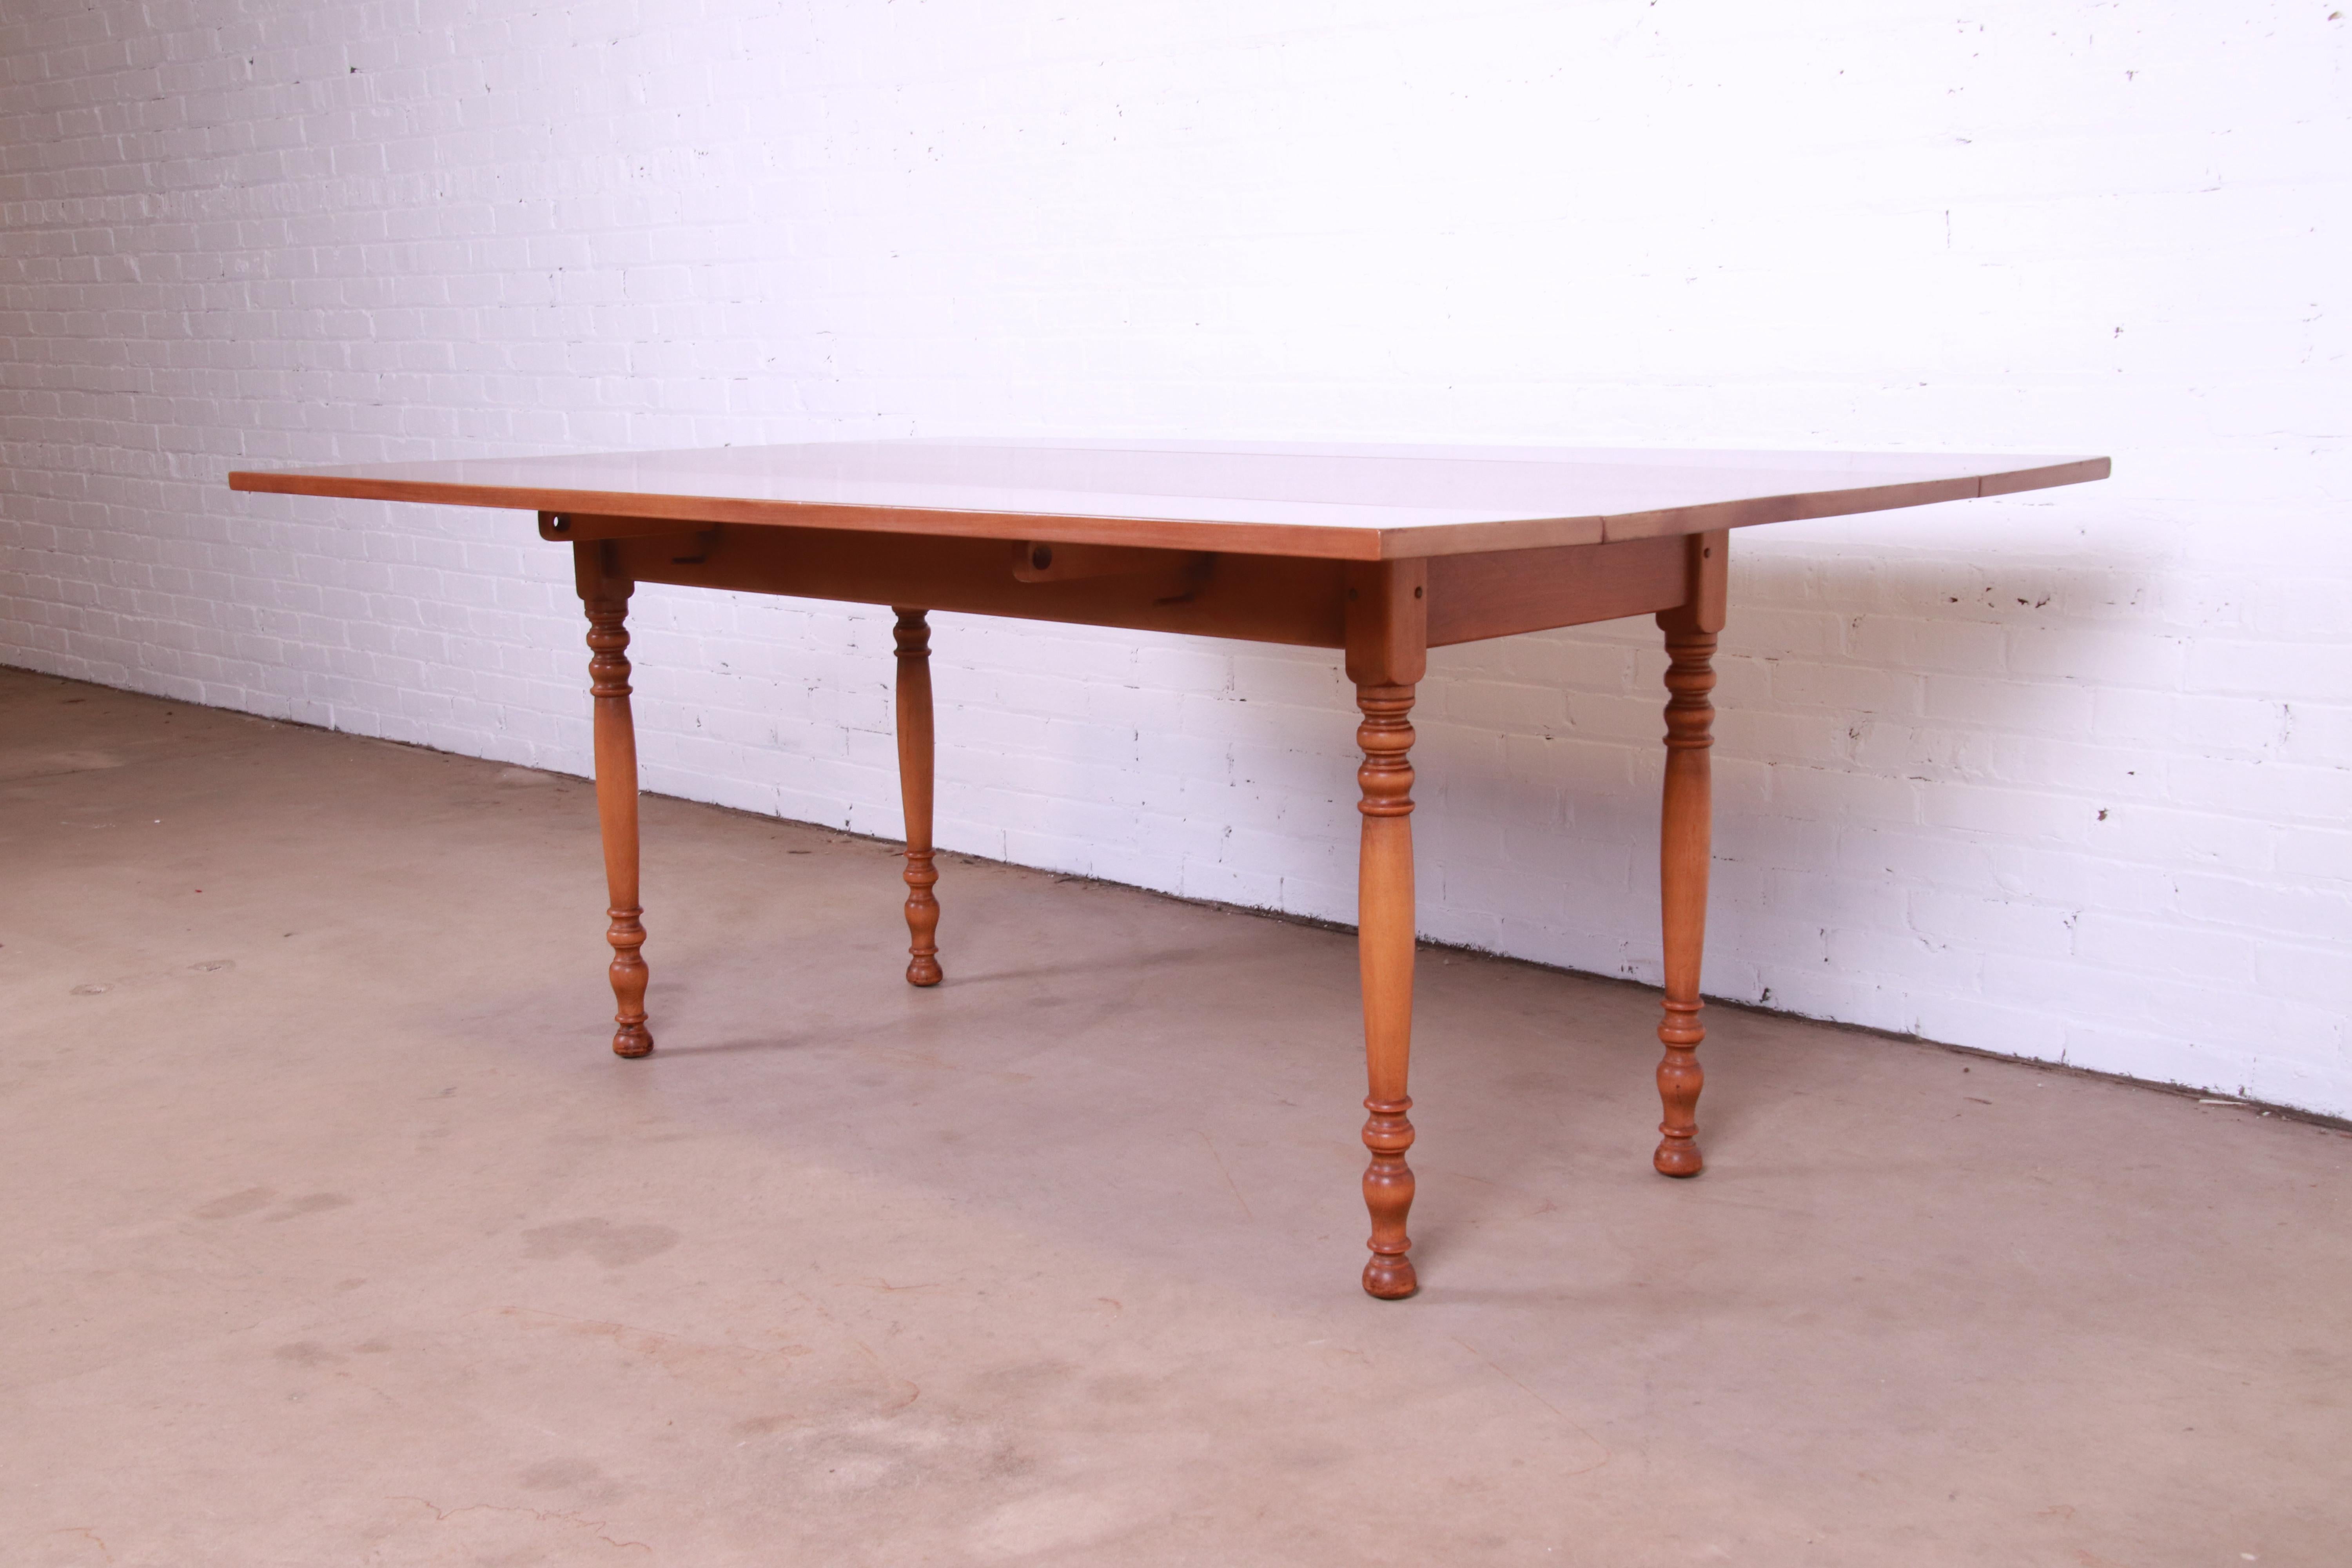 Stickley American Colonial Solid Cherry Wood Harvest Dining Table, 1956 In Good Condition For Sale In South Bend, IN